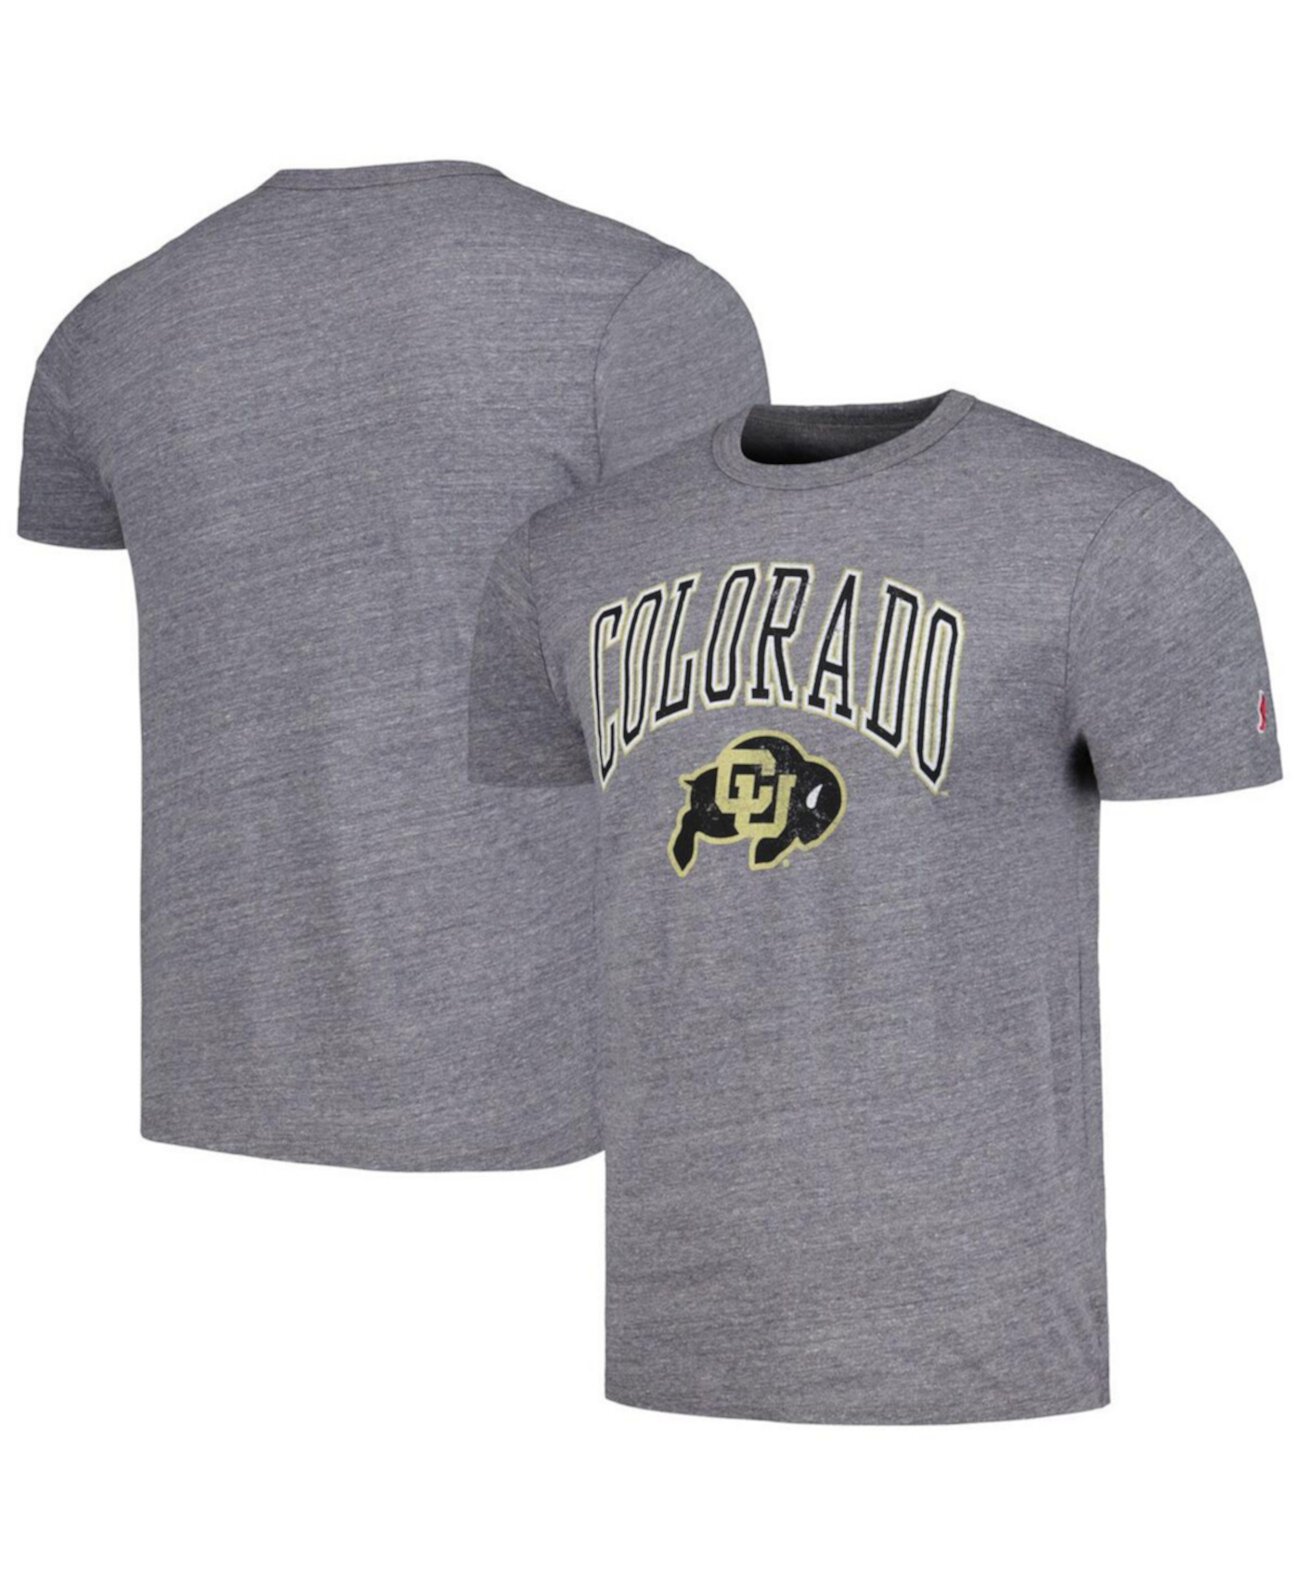 Men's Heather Gray Distressed Colorado Buffaloes Tall Arch Victory Falls Tri-Blend T-shirt League Collegiate Wear